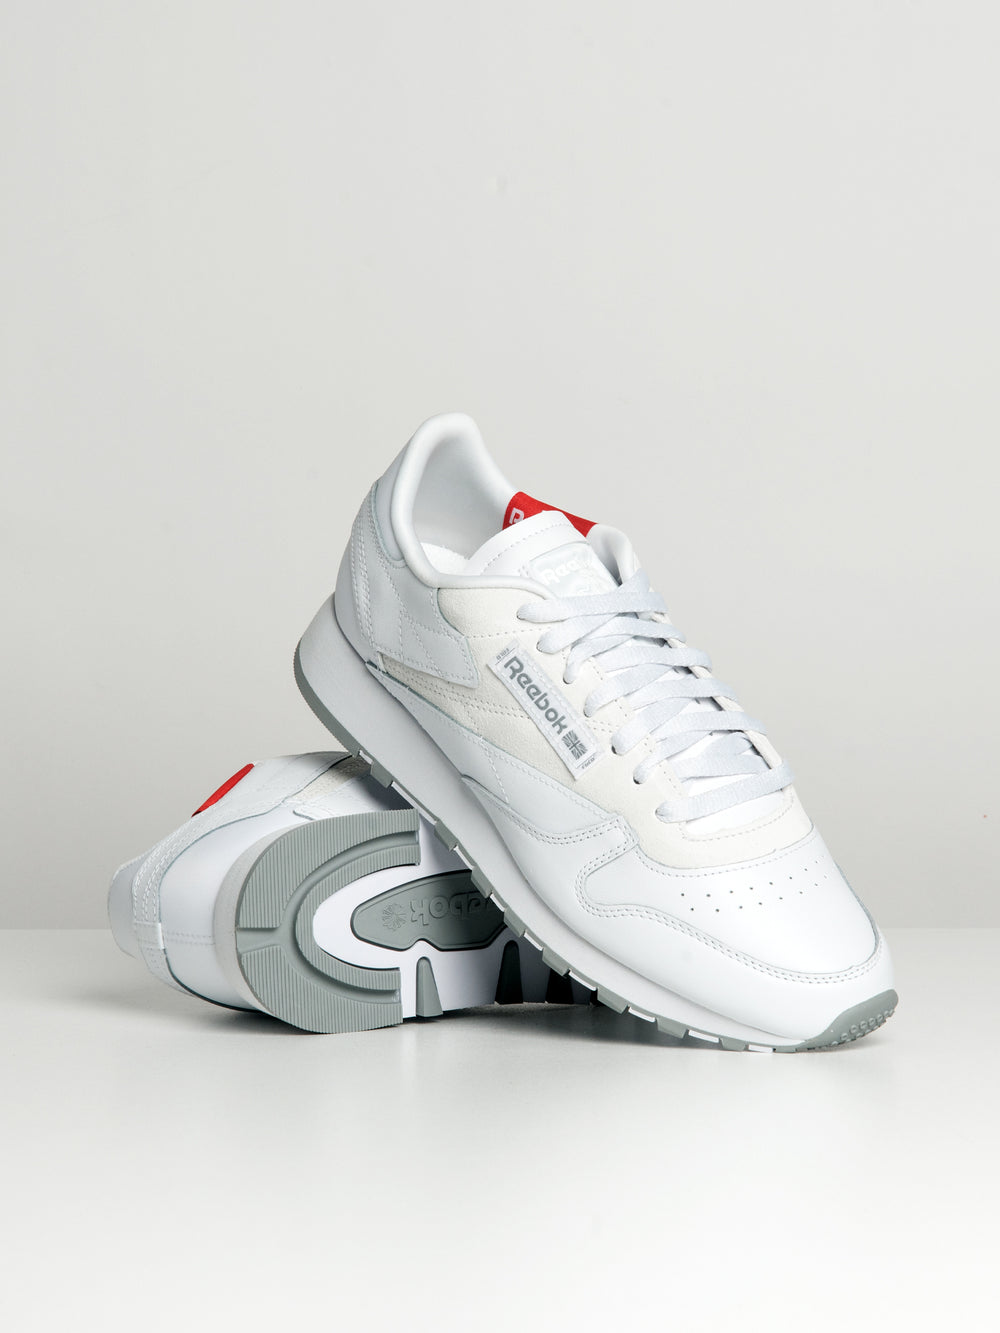 REEBOK LEATHER CLASSIC Boathouse | SNEAKERS Footwear Collective MENS